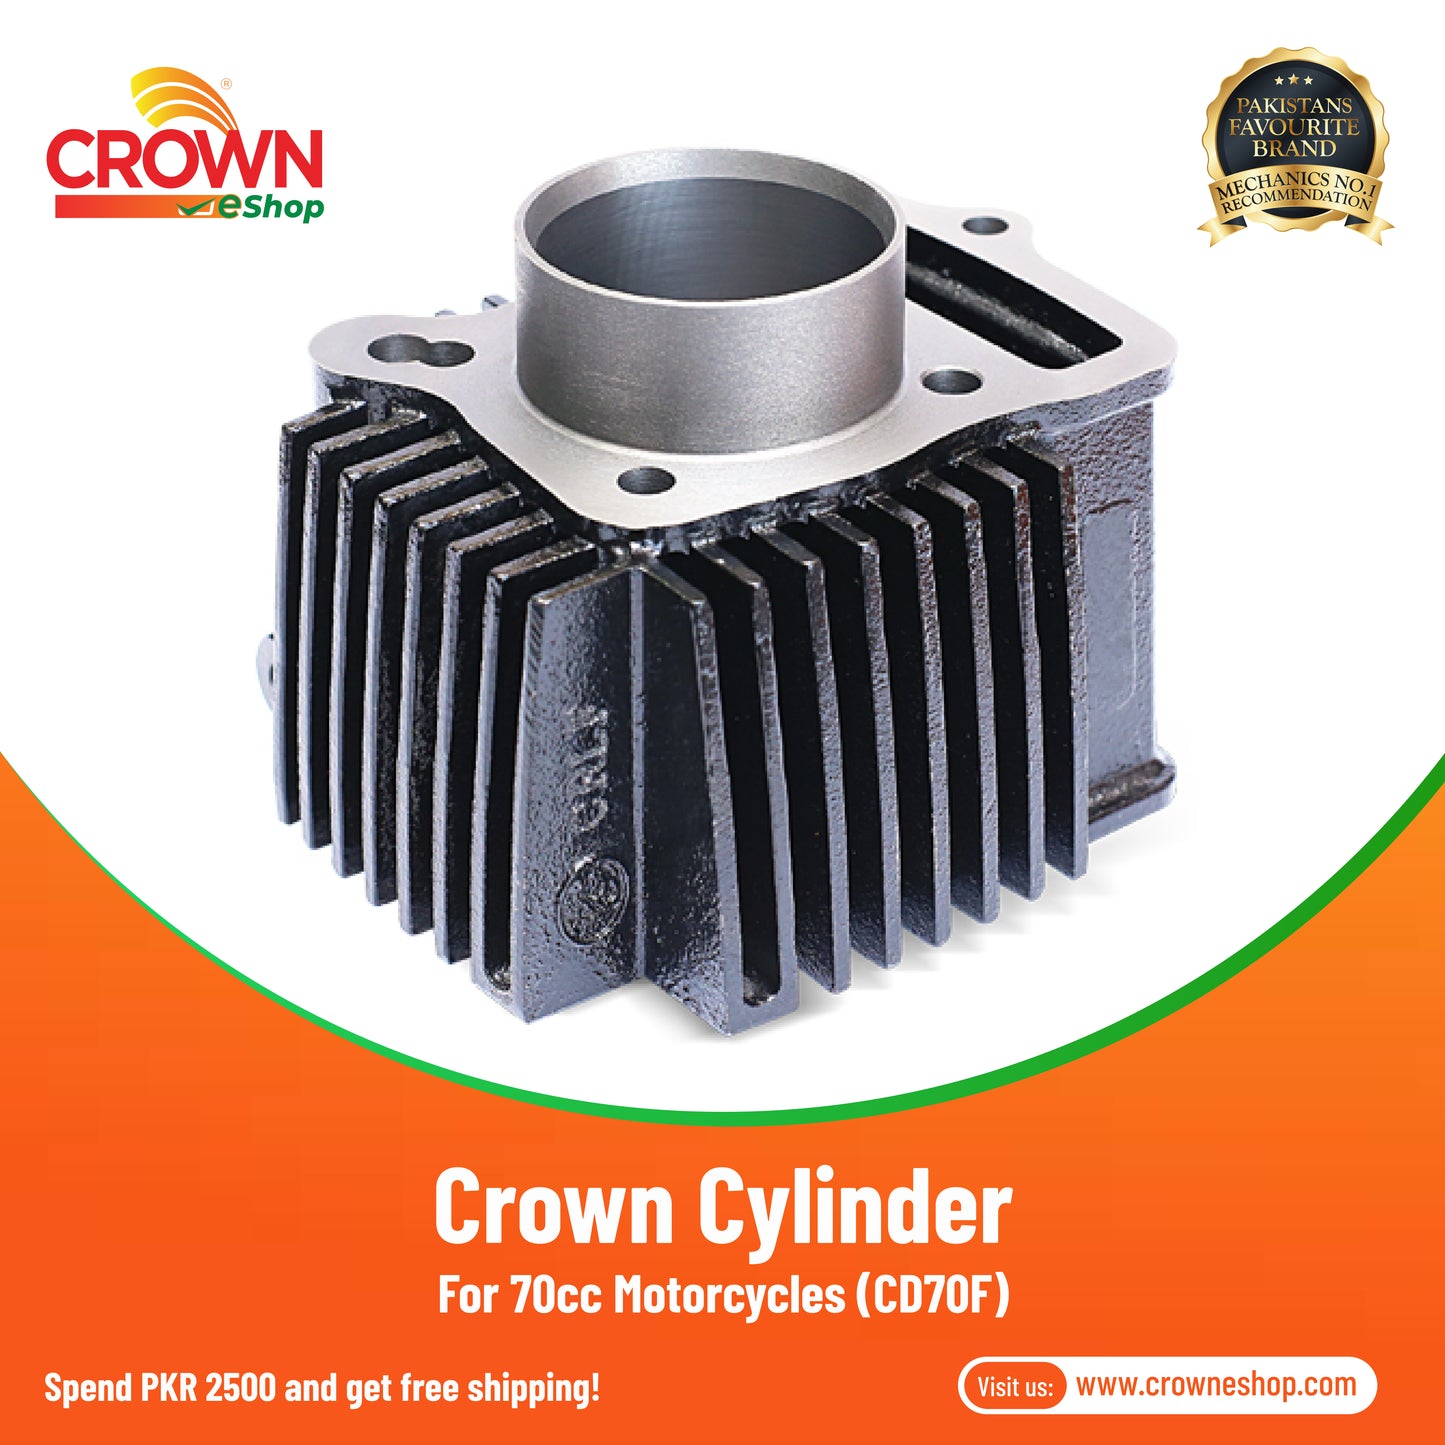 Crown Cylinder for 70cc Motorcycles (CD70F) - Crowneshop